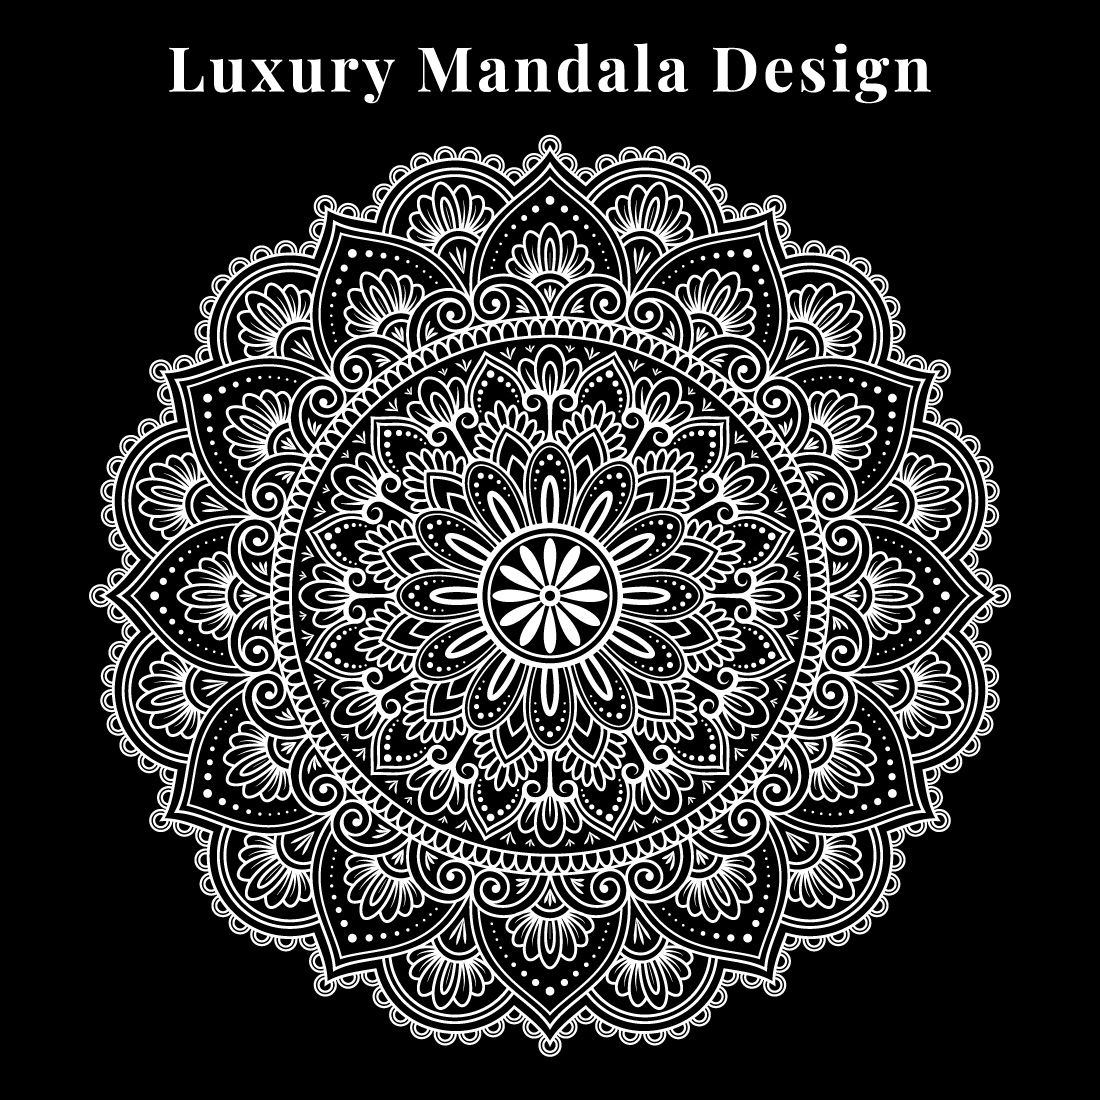 Luxury Mandala Design Template patterns for any kind of festival preview image.